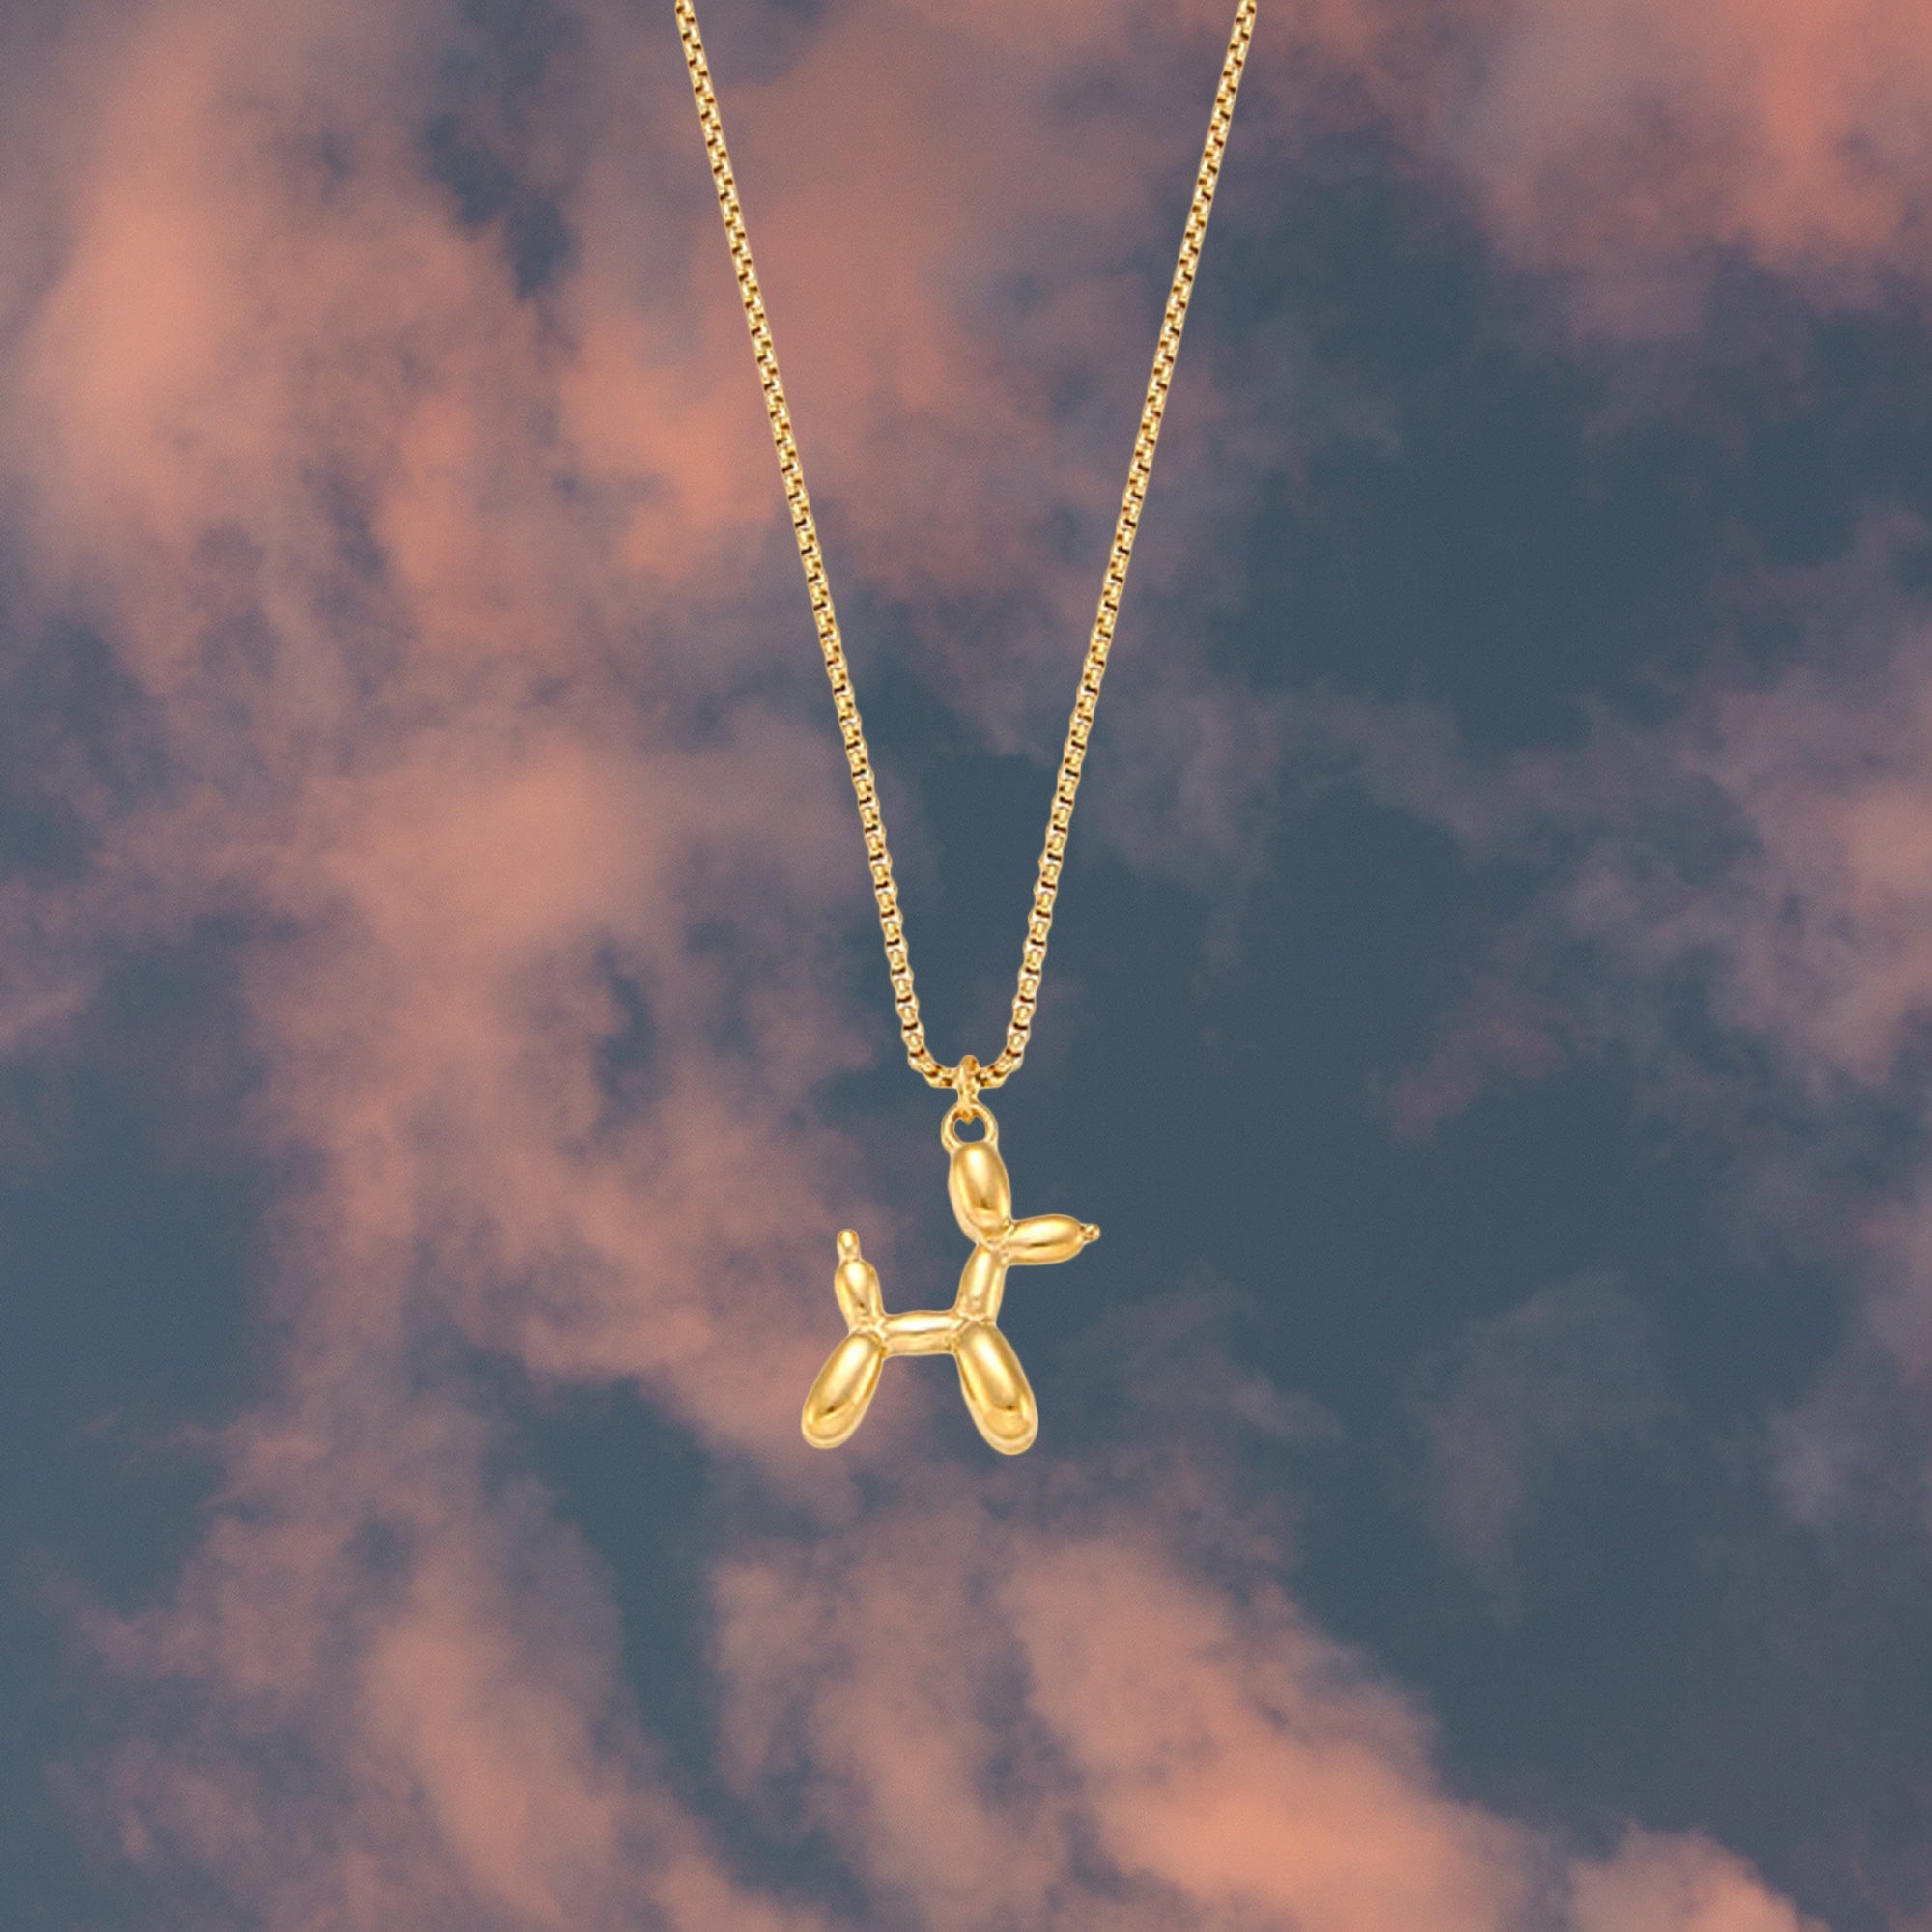 Balloon Dog Necklace - Time's Reel